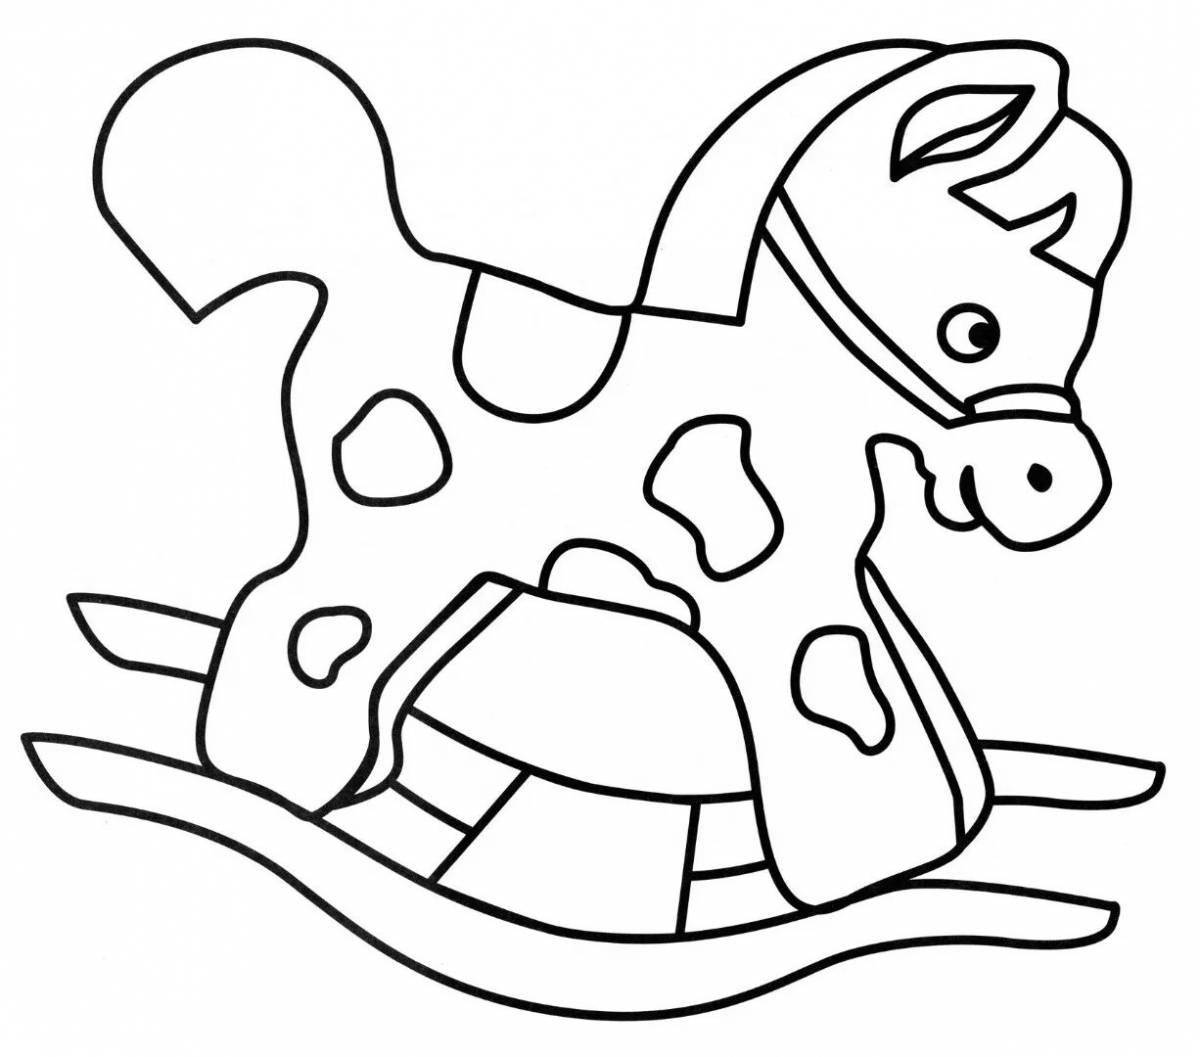 Adorable rocking horse coloring book for babies